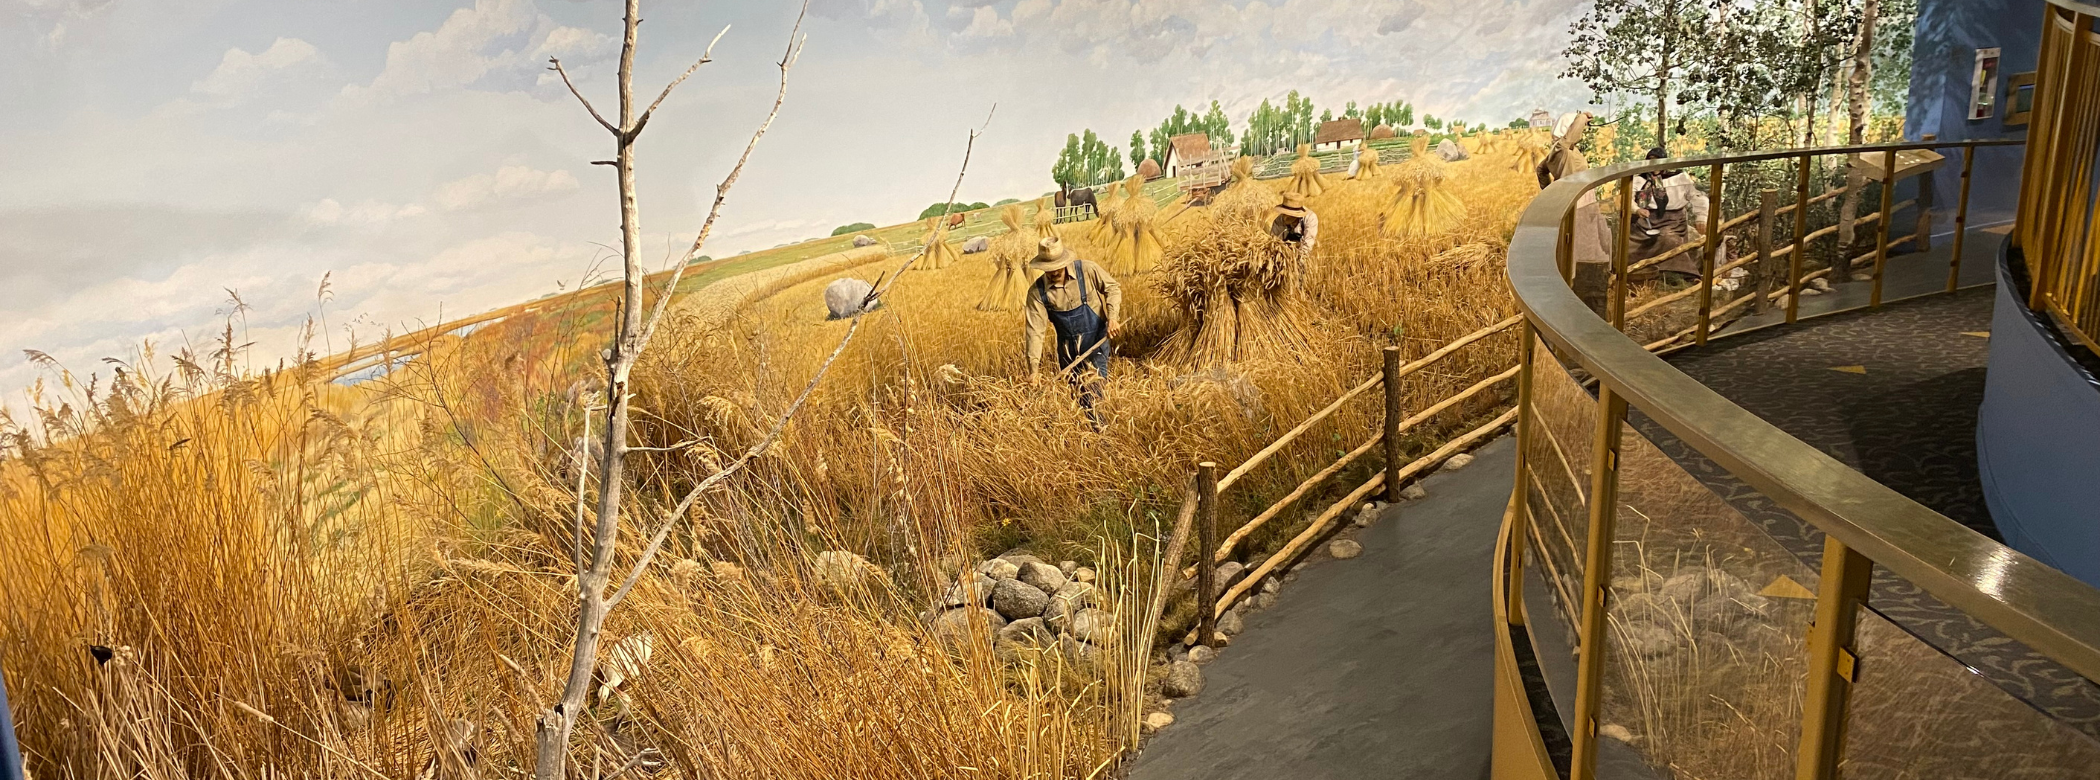 Diorama depicting a man wearing blue coveralls and a white button up shirt, a straw hat on his head holding a scythe in his hand. The man is using the scythe to cut down a field of wheat stalks. Boulders are in the forefront and green prairie grasses are scattered about.